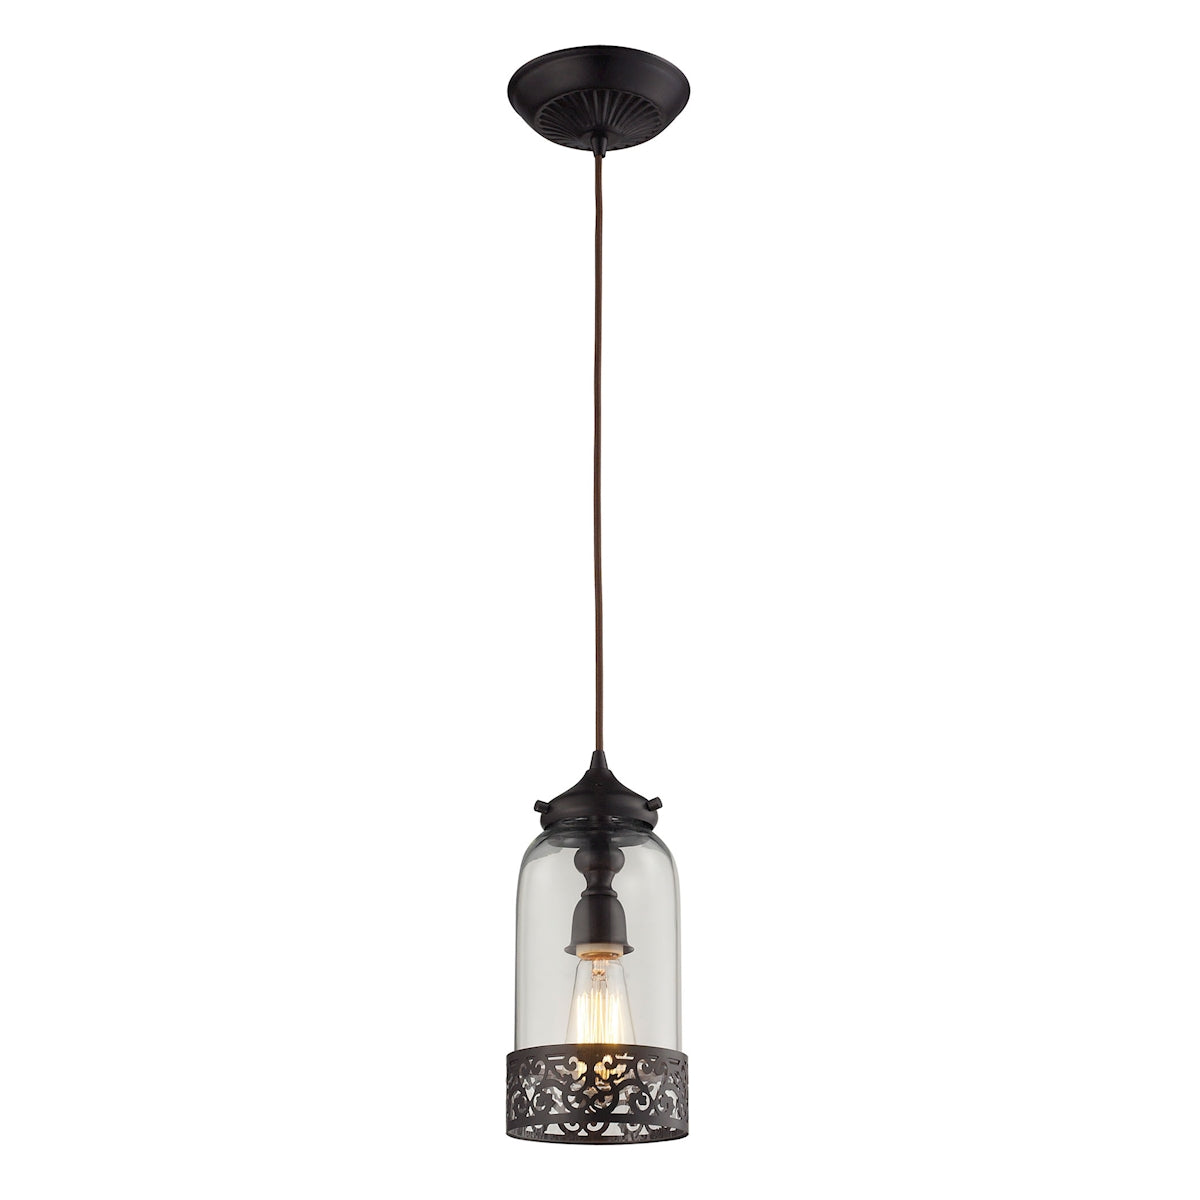 ELK Lighting 63035-1 Brookline 1-Light Mini Pendant in Oiled Bronze with Metal and Glass Shade